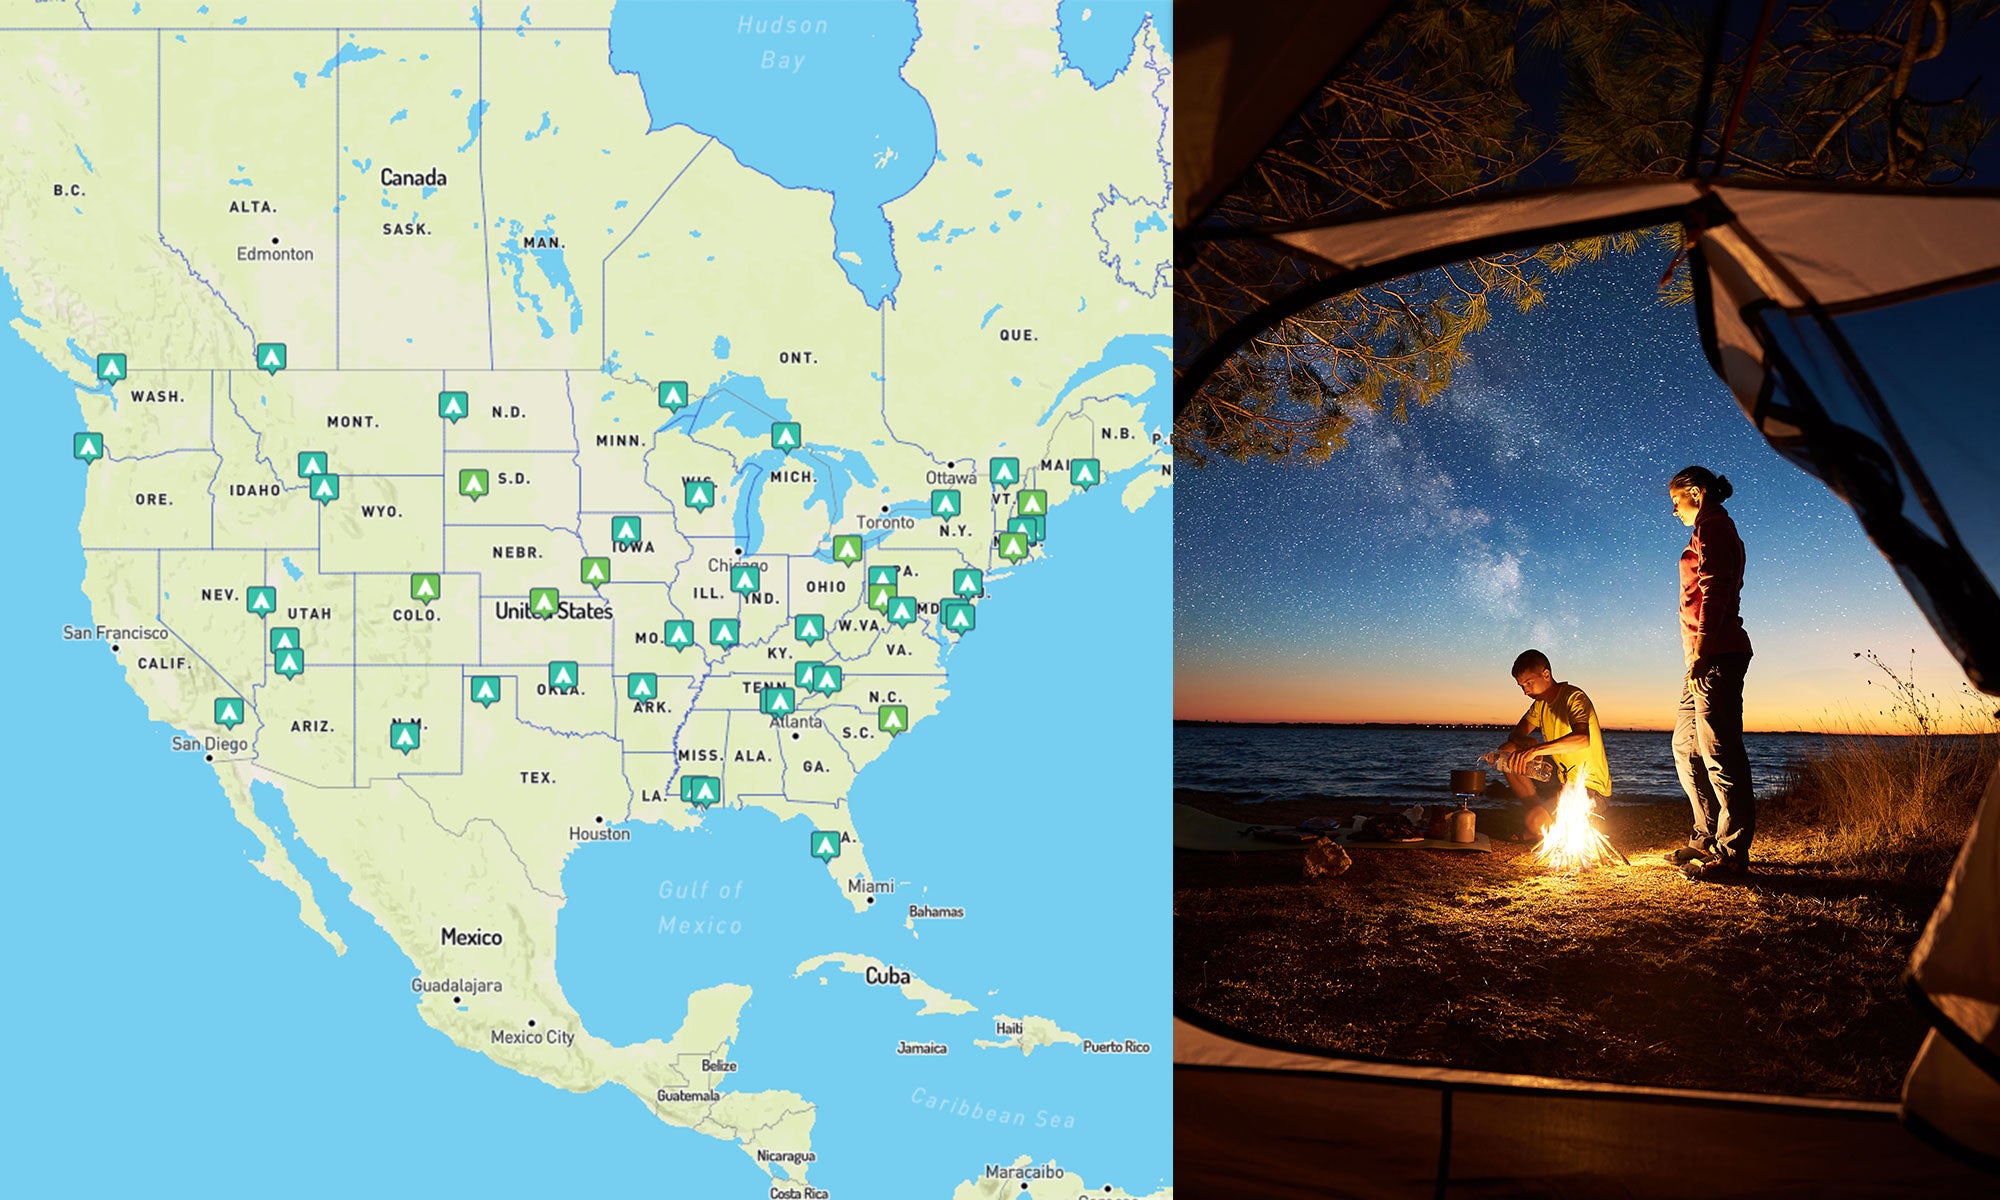 (left) top campground per state, mapped (right) looking through tent door from the inside showing two beach campers stand near campfire at sunset